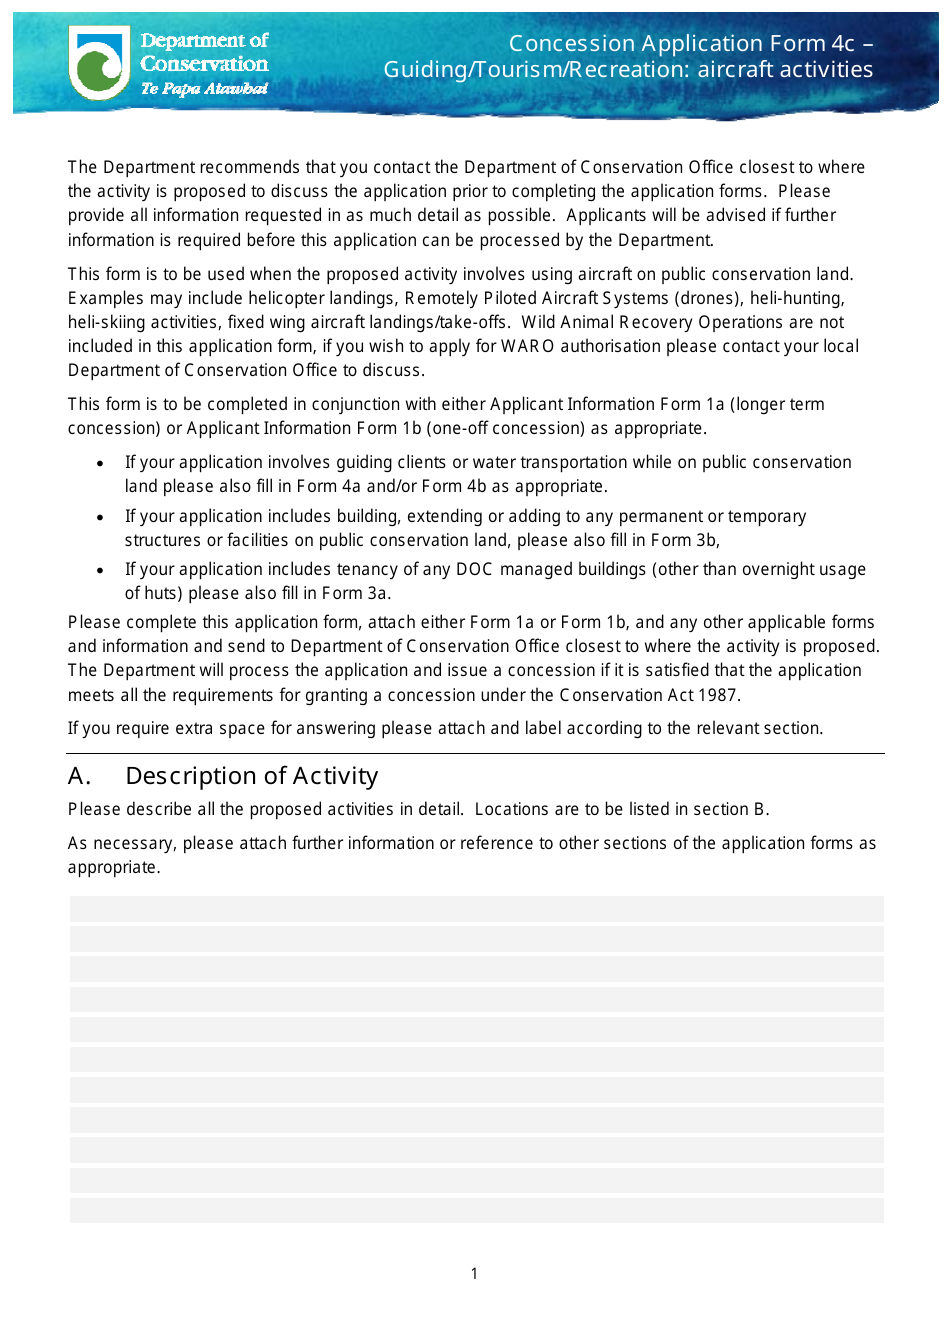 Form 4C Concession Application Form - Guiding / Tourism / Recreation: Aircraft Activities - New Zealand, Page 1